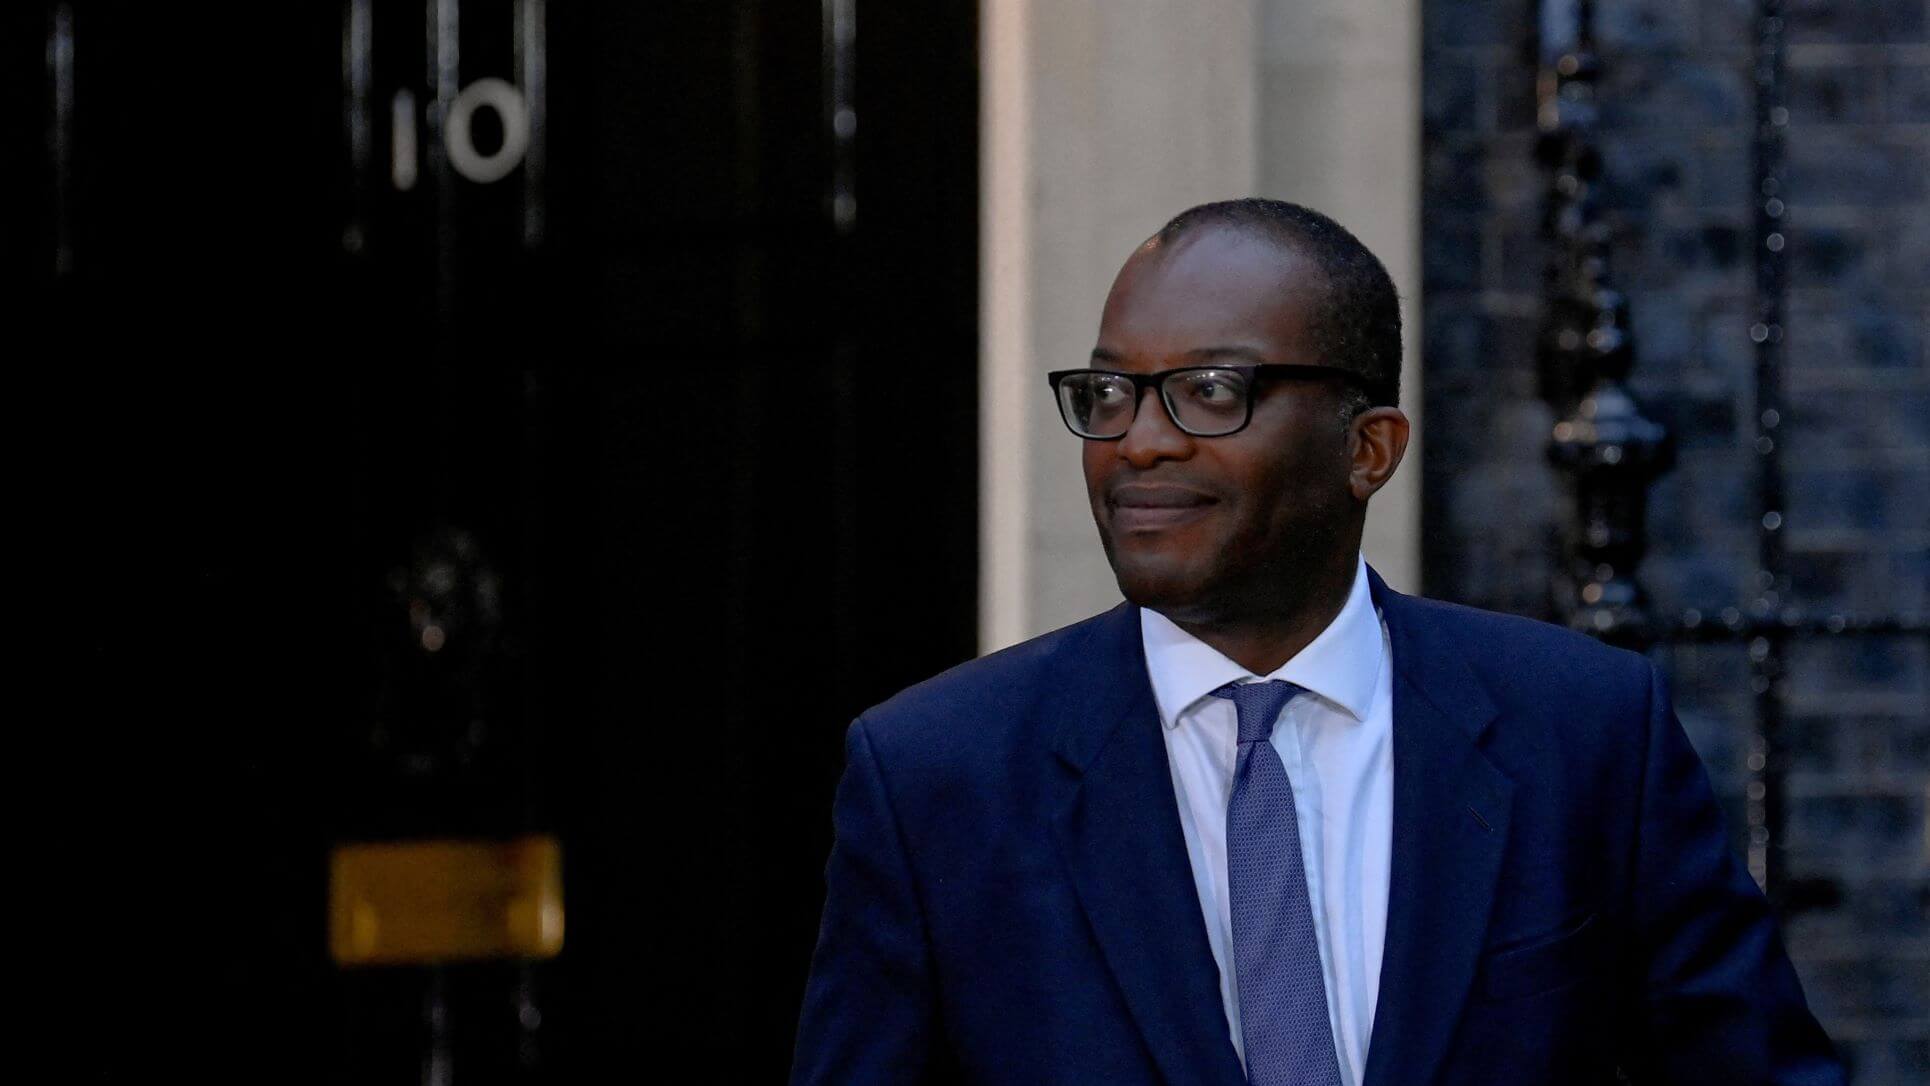 UK Borrows More Than Expected In August As Kwarteng Prepares Mini-Budget